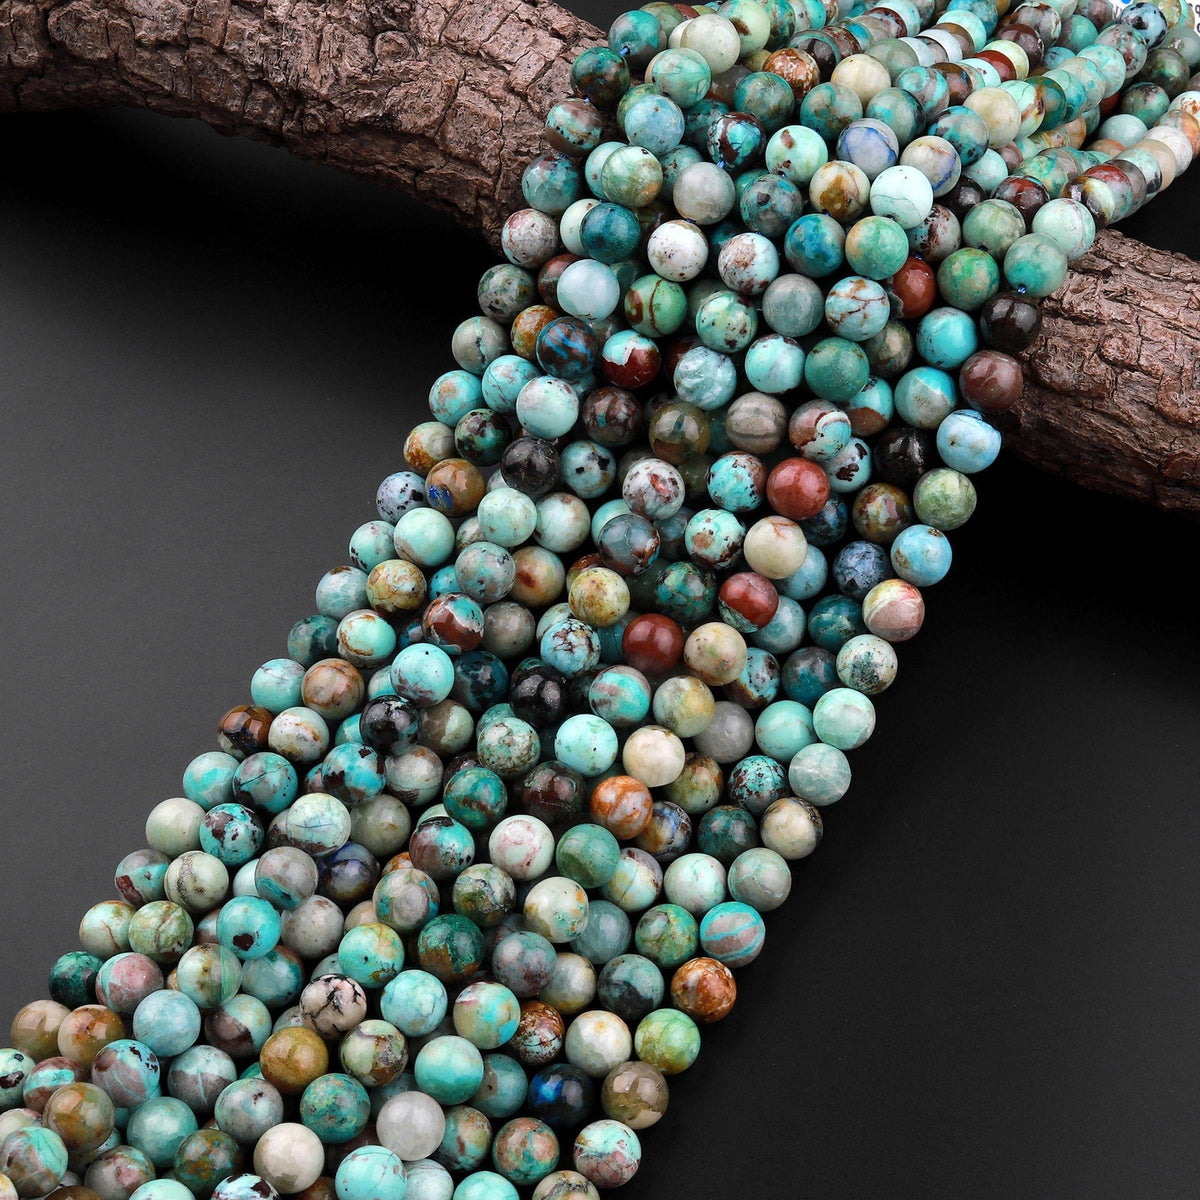 Natural Chrysocolla Beads, Gemstone Supplies - Dearbeads